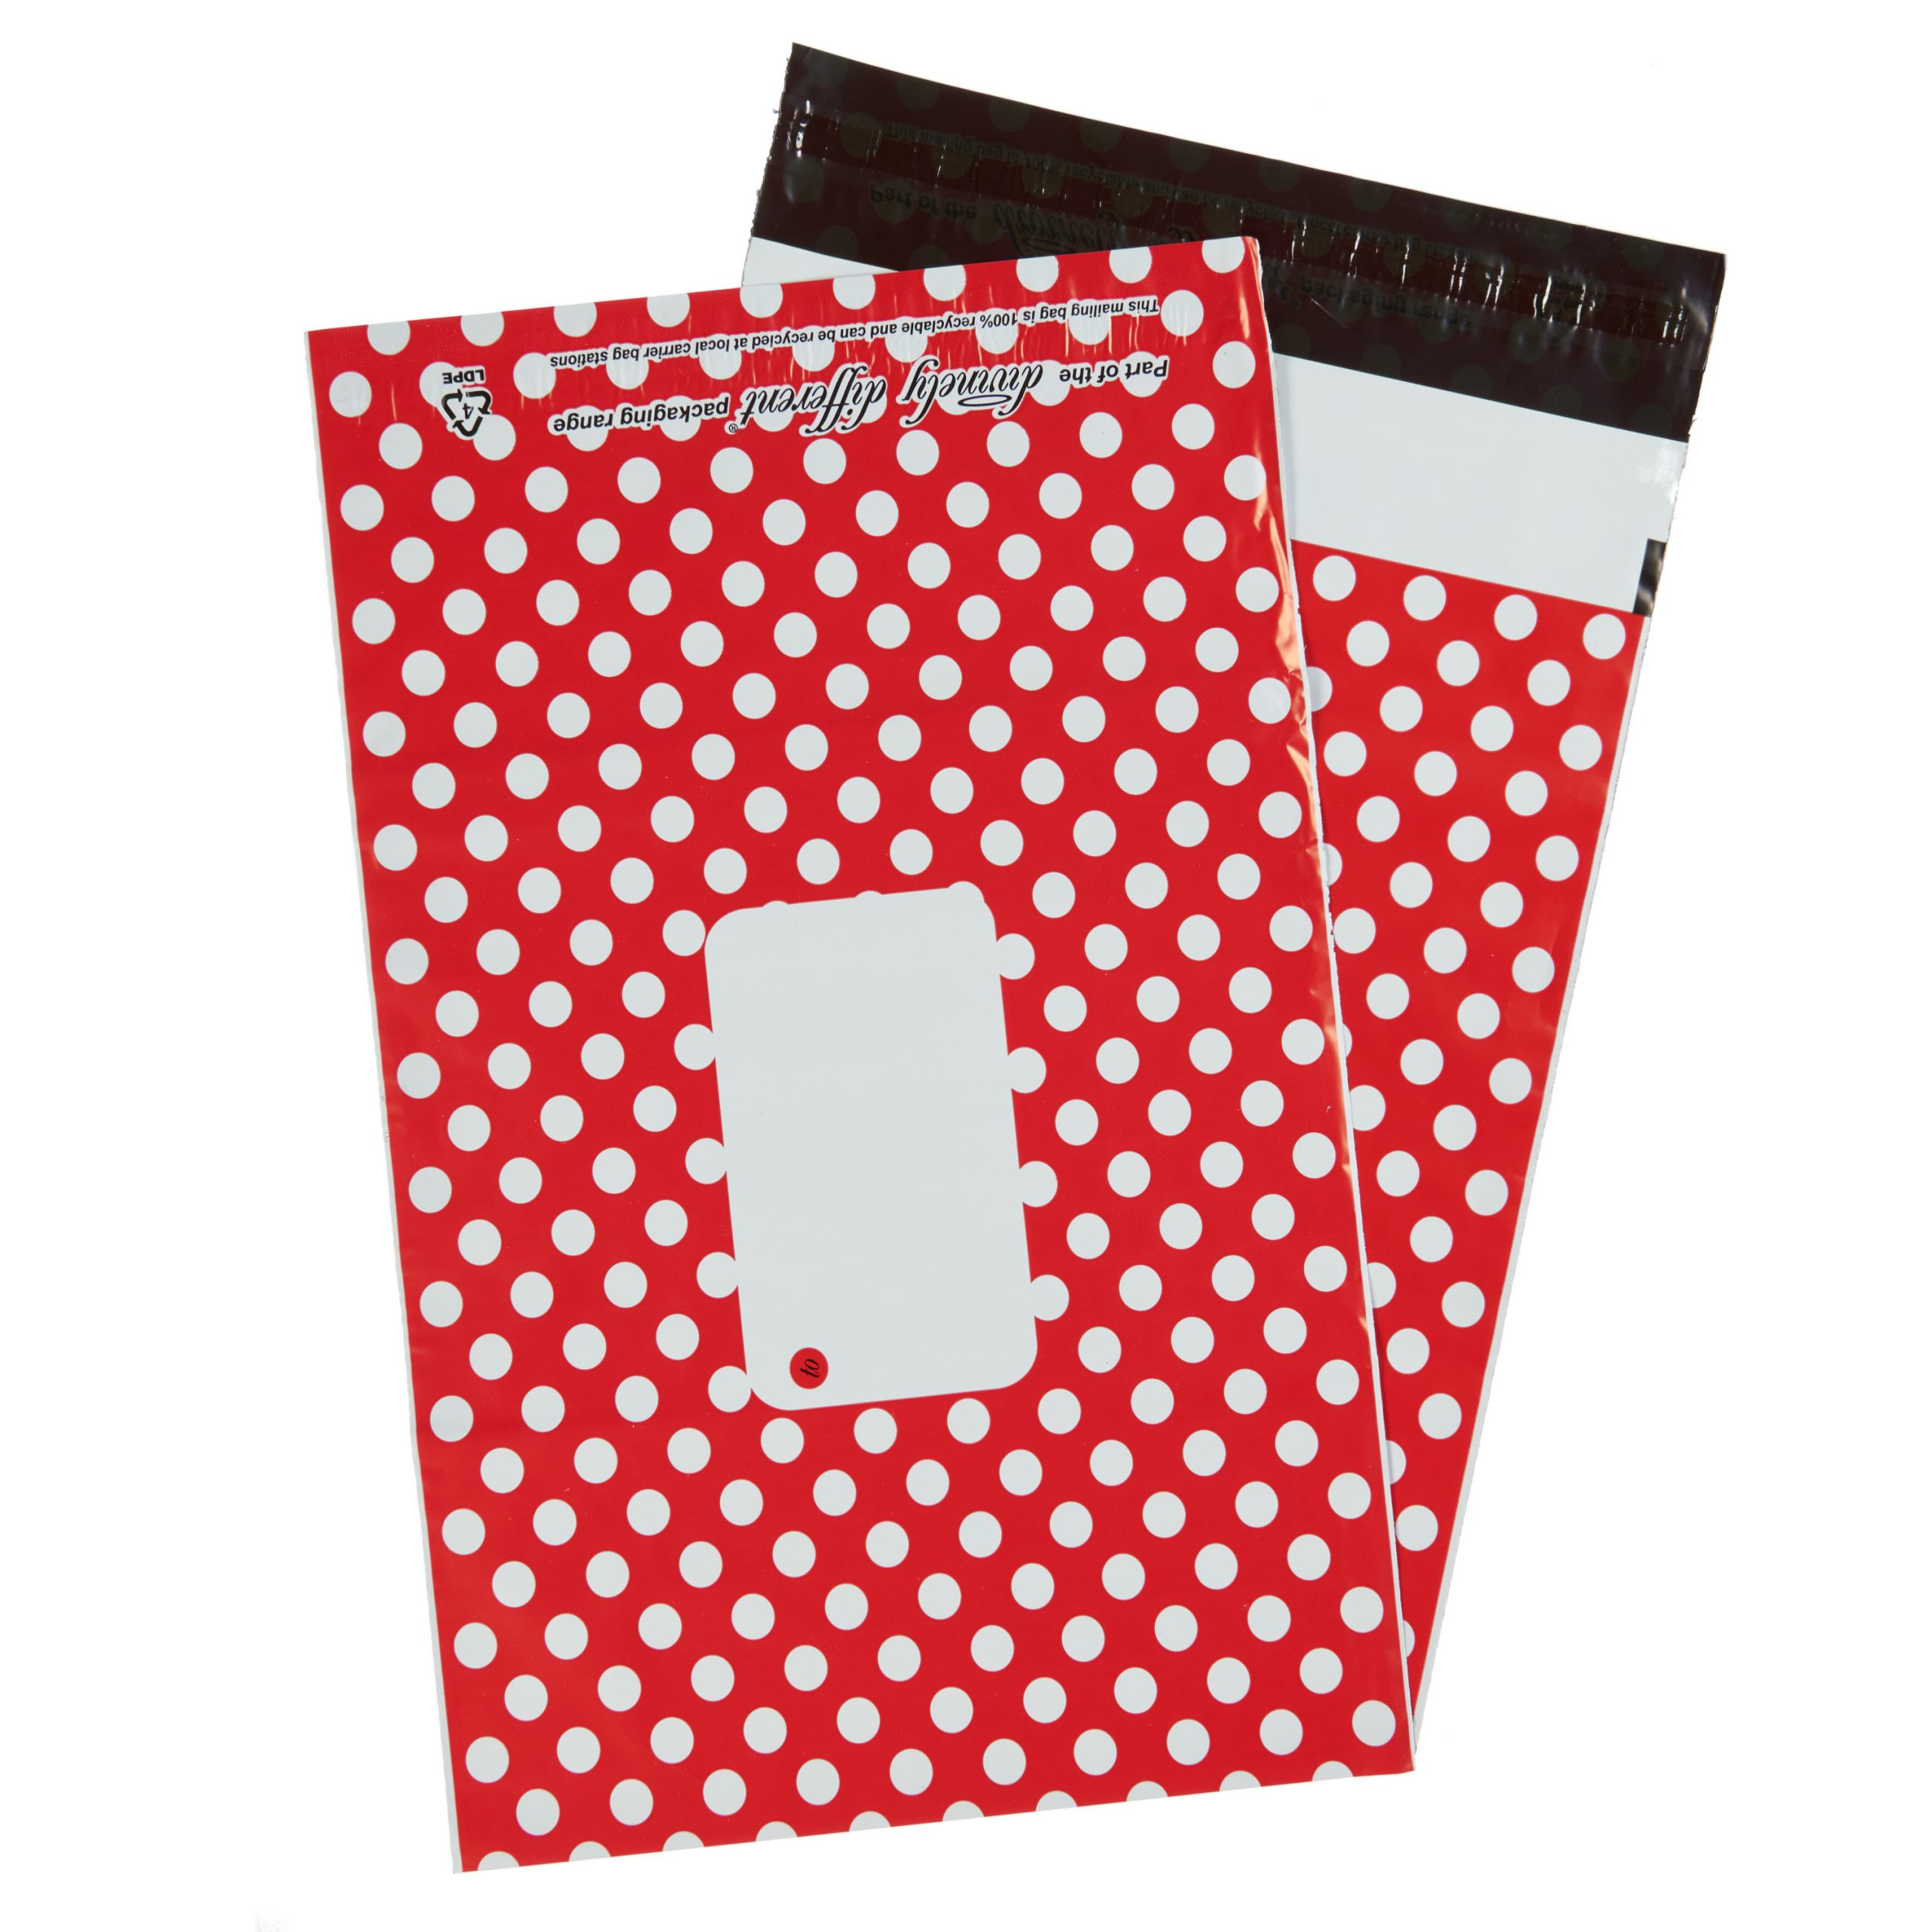 10 Yellow Polka Dots 10" x 14" Mailing Postage Postal Mail Bags 